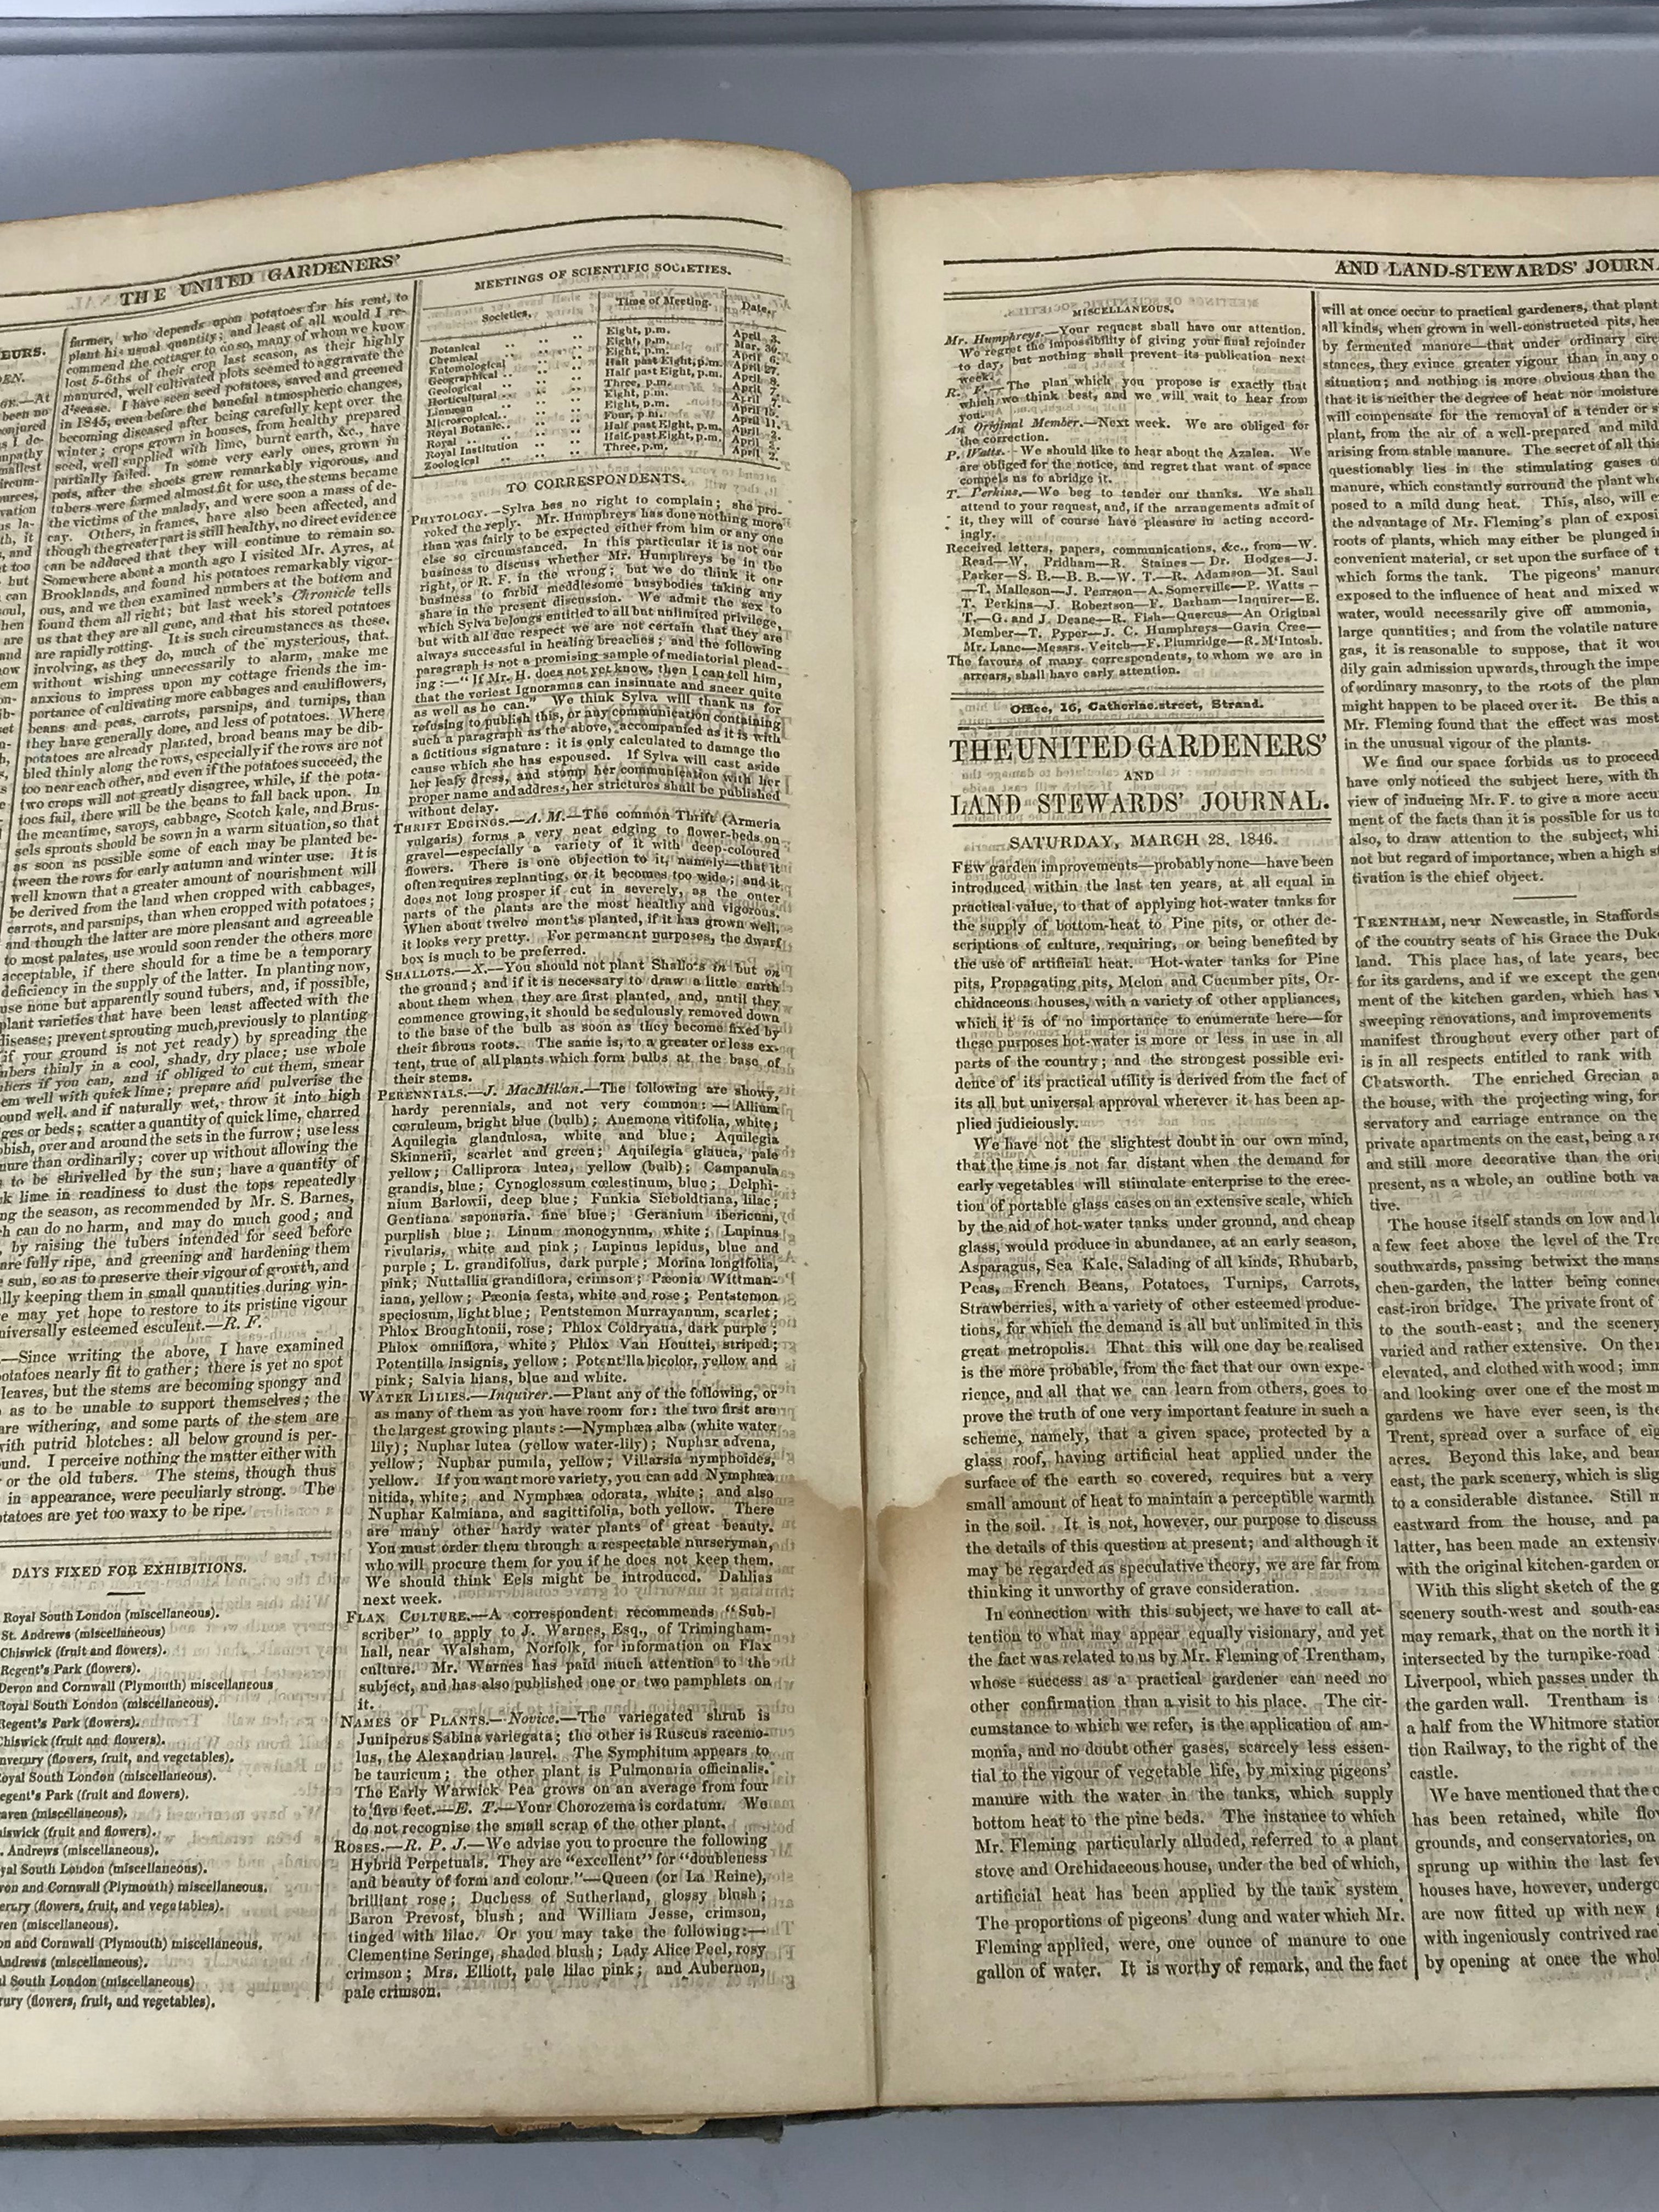 The United Gardeners' and Land-Stewards Journal 1846 Bound